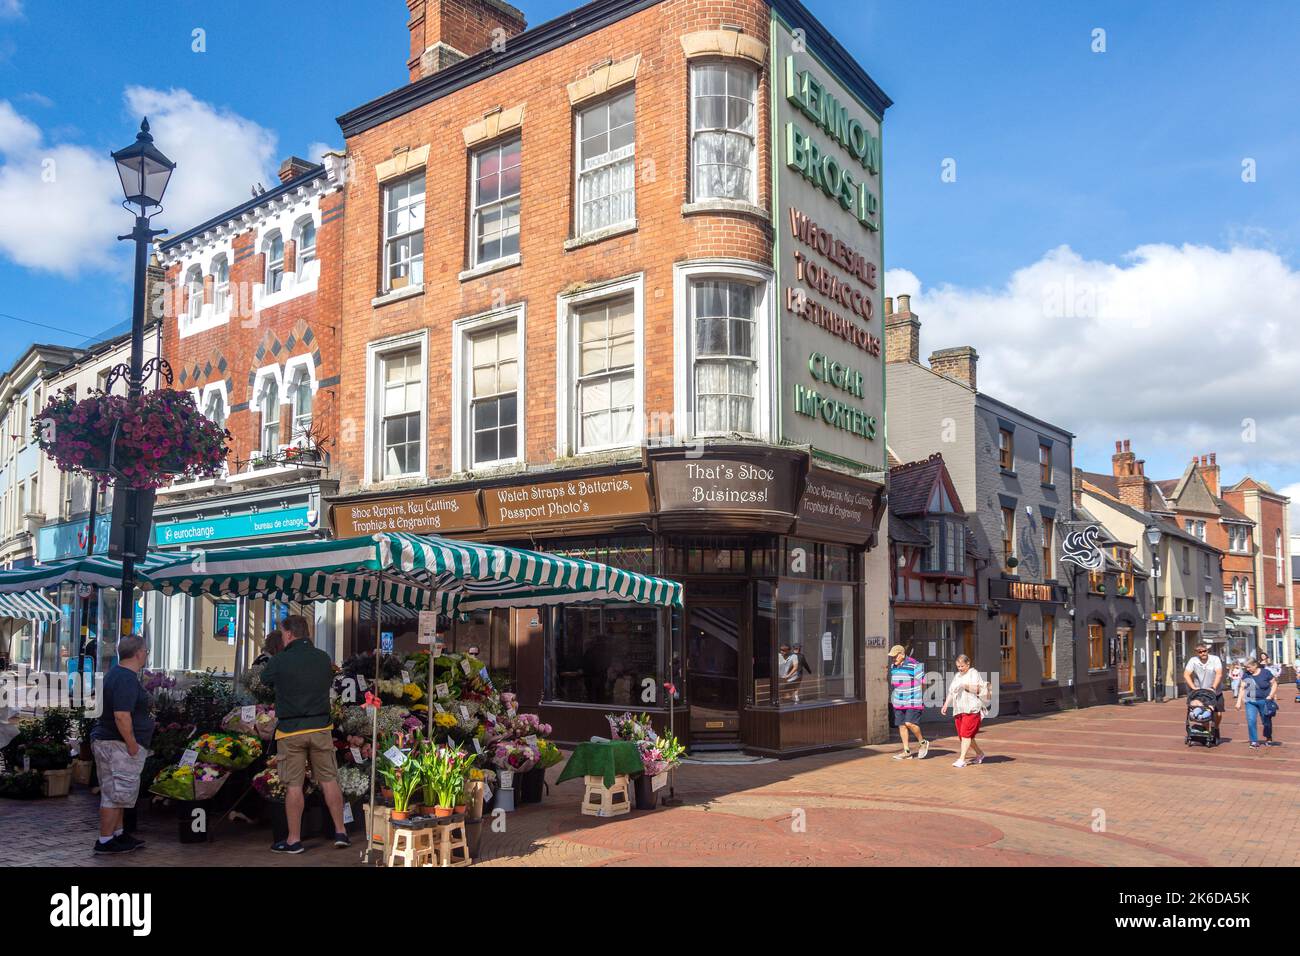 Farmers Market Flower Stall, Market Place, Rugby, Warwickshire, Inghilterra, Regno Unito Foto Stock